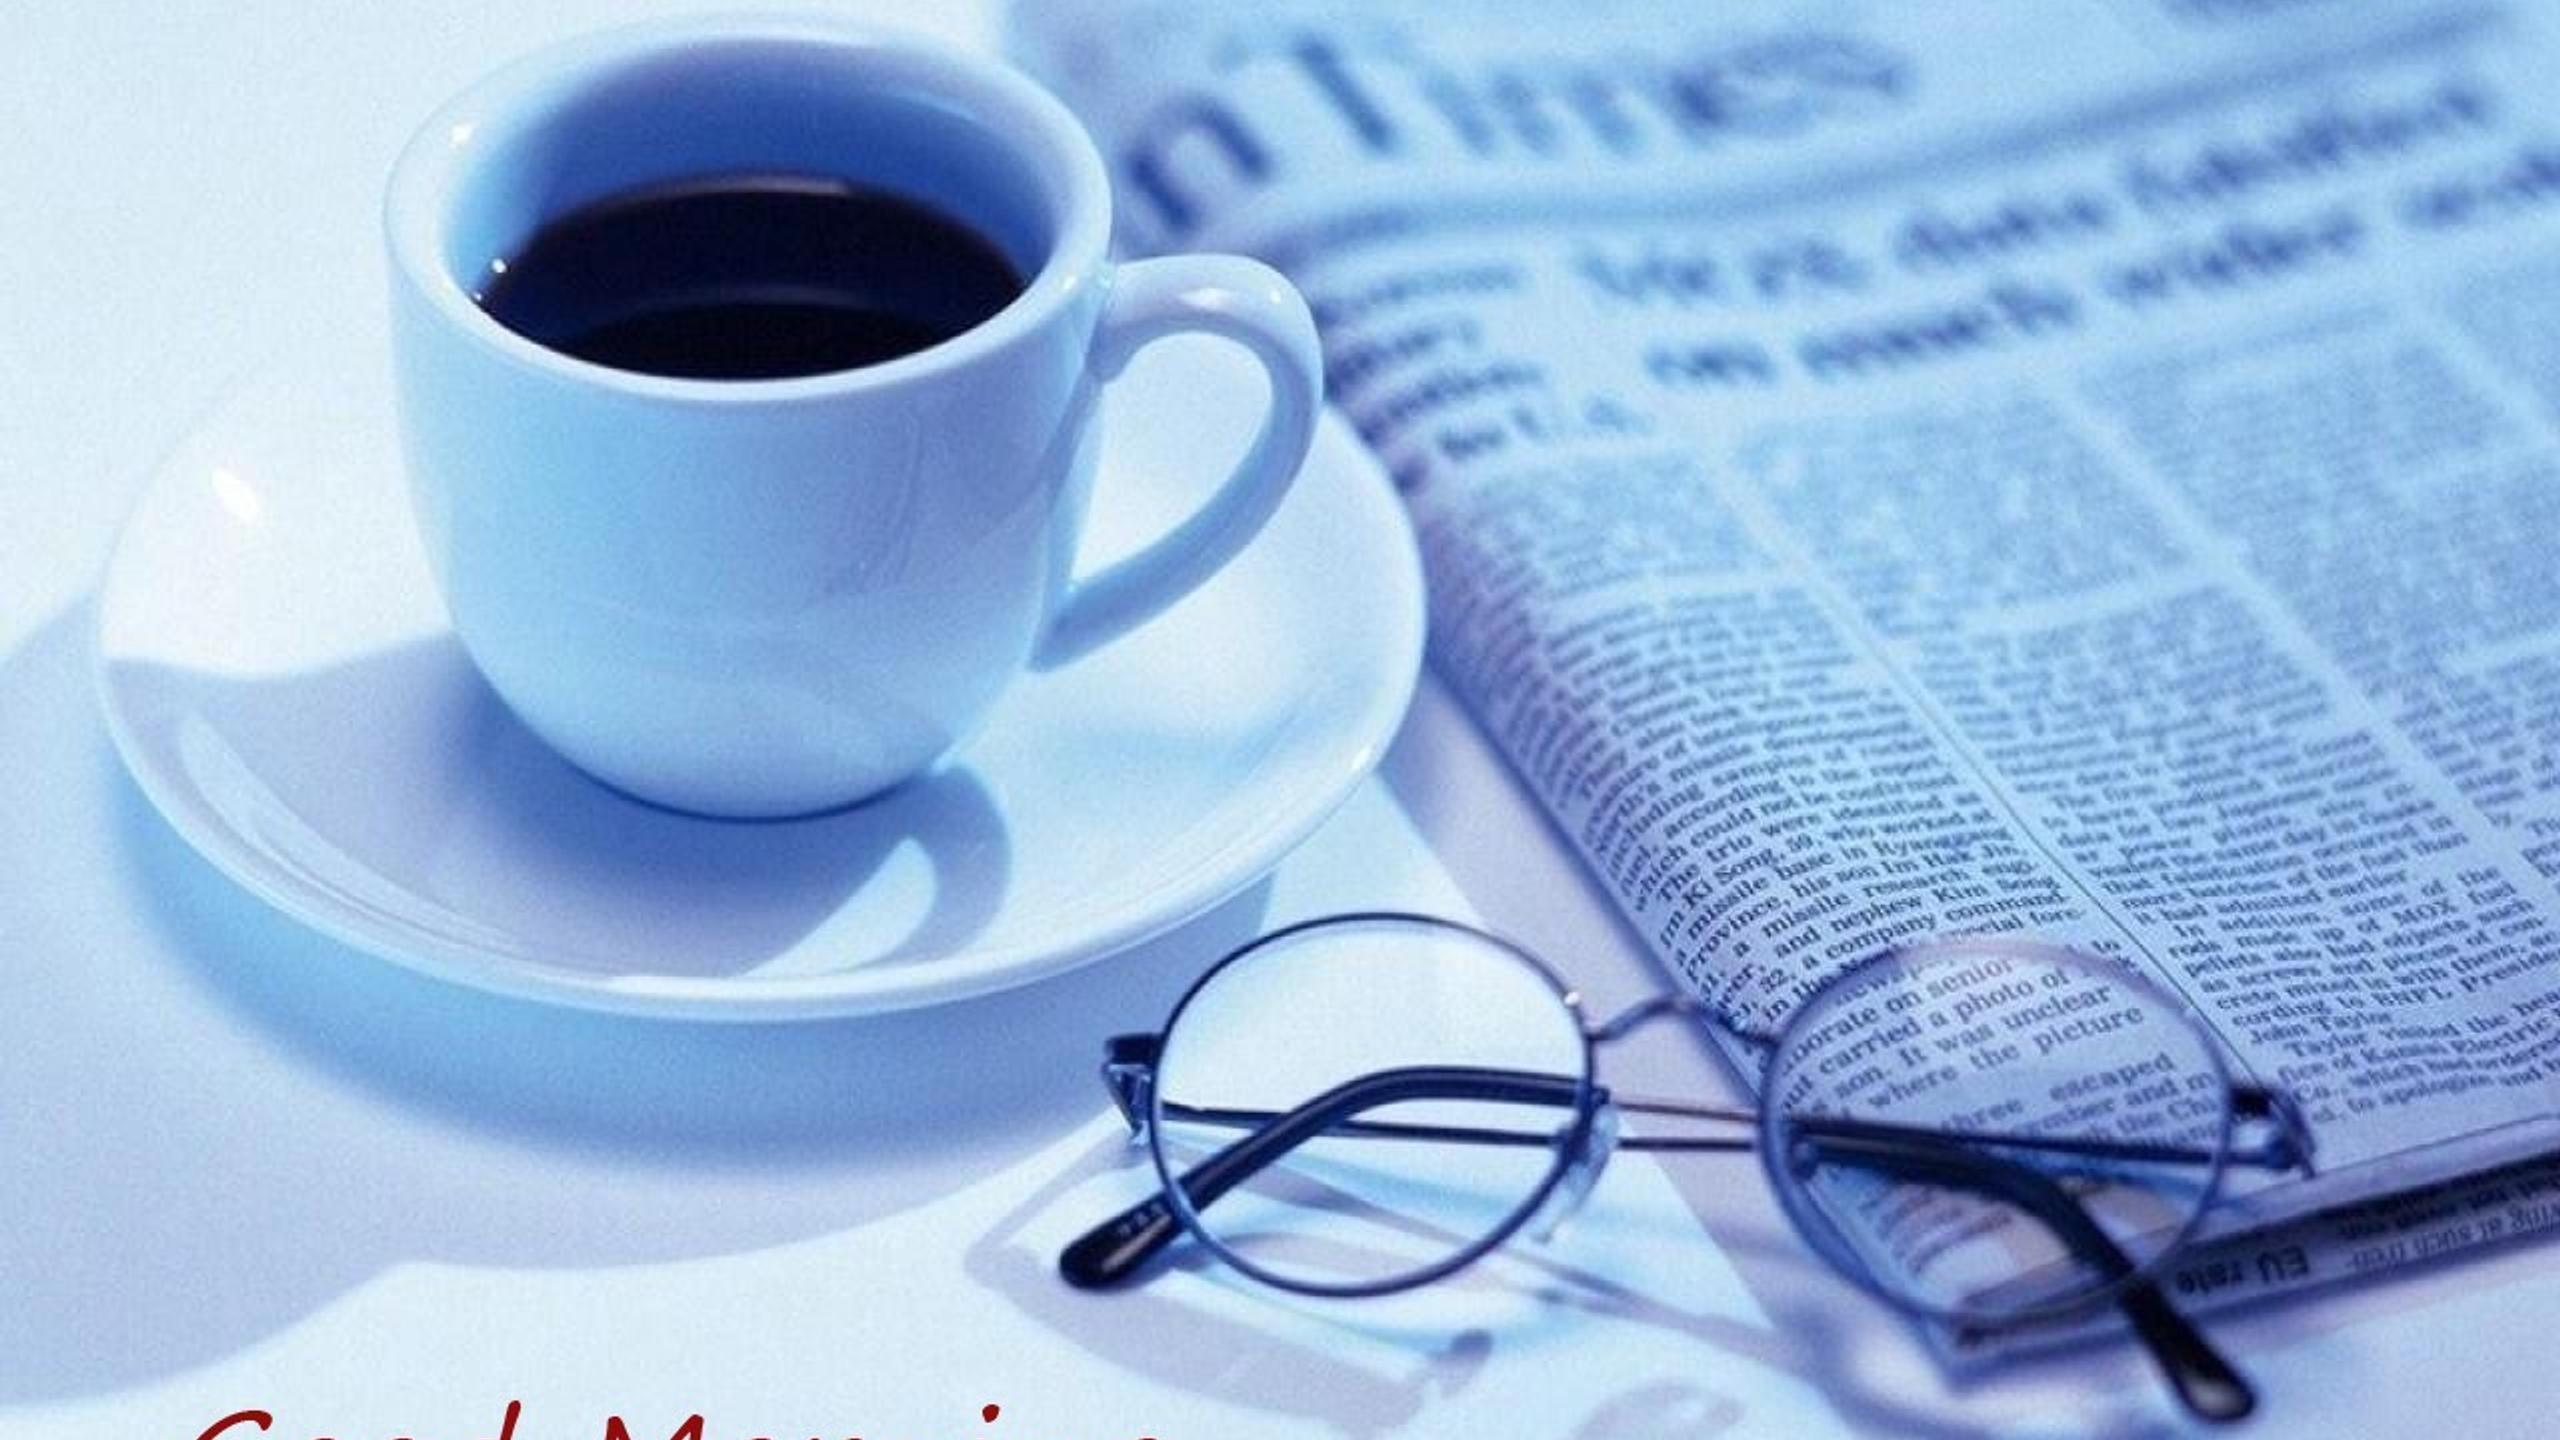 Good morning with a dark coffee and newspaper